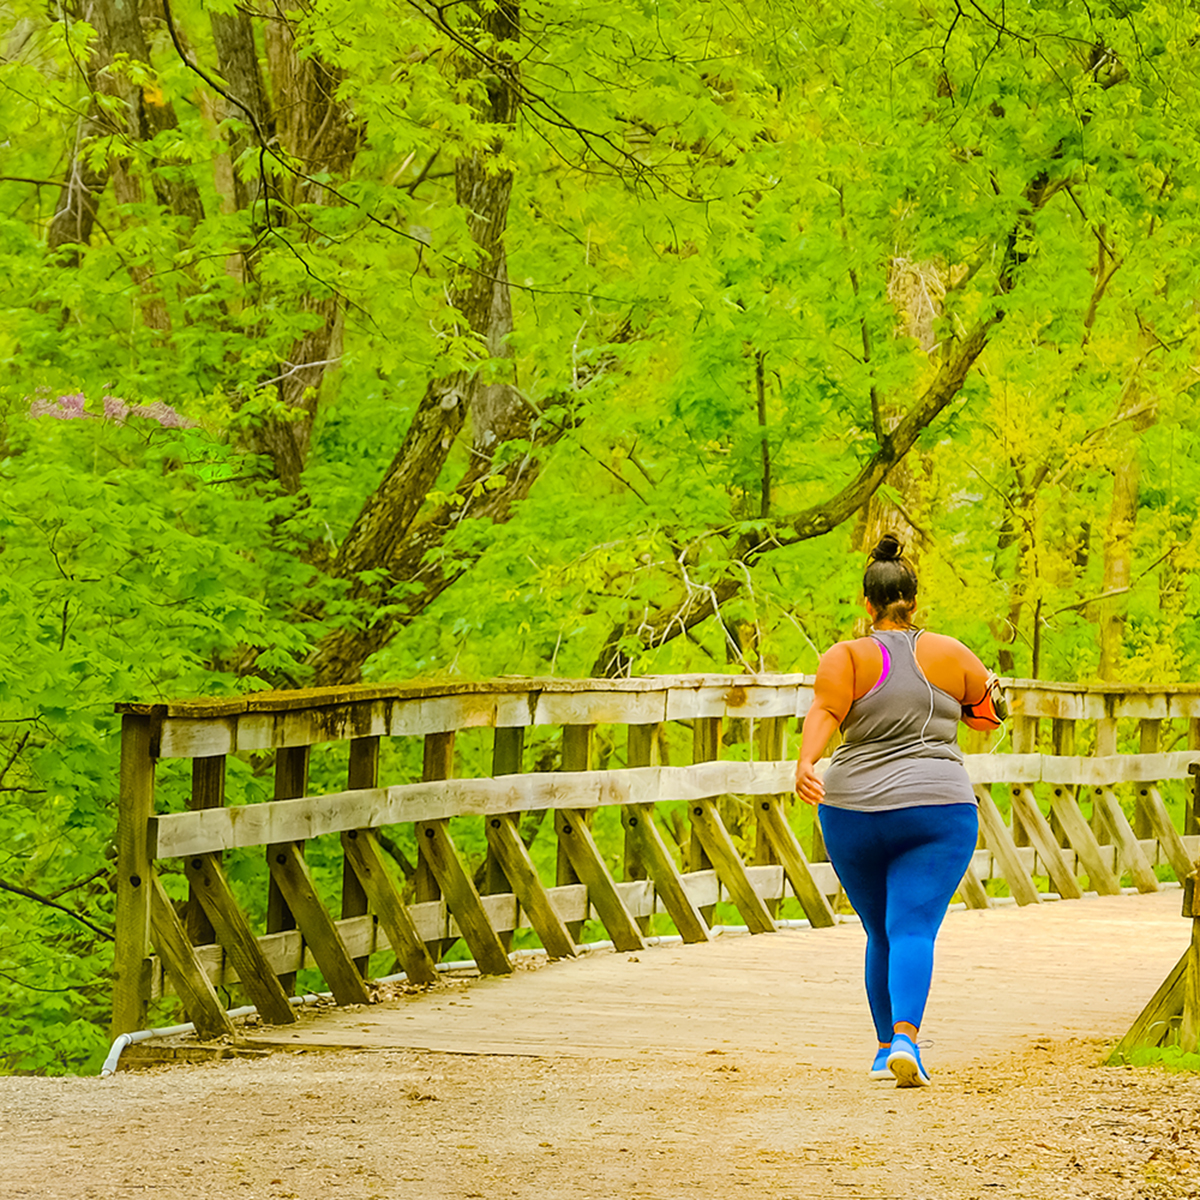 8 Reasons Why Walking is an Excellent Form of Exercise